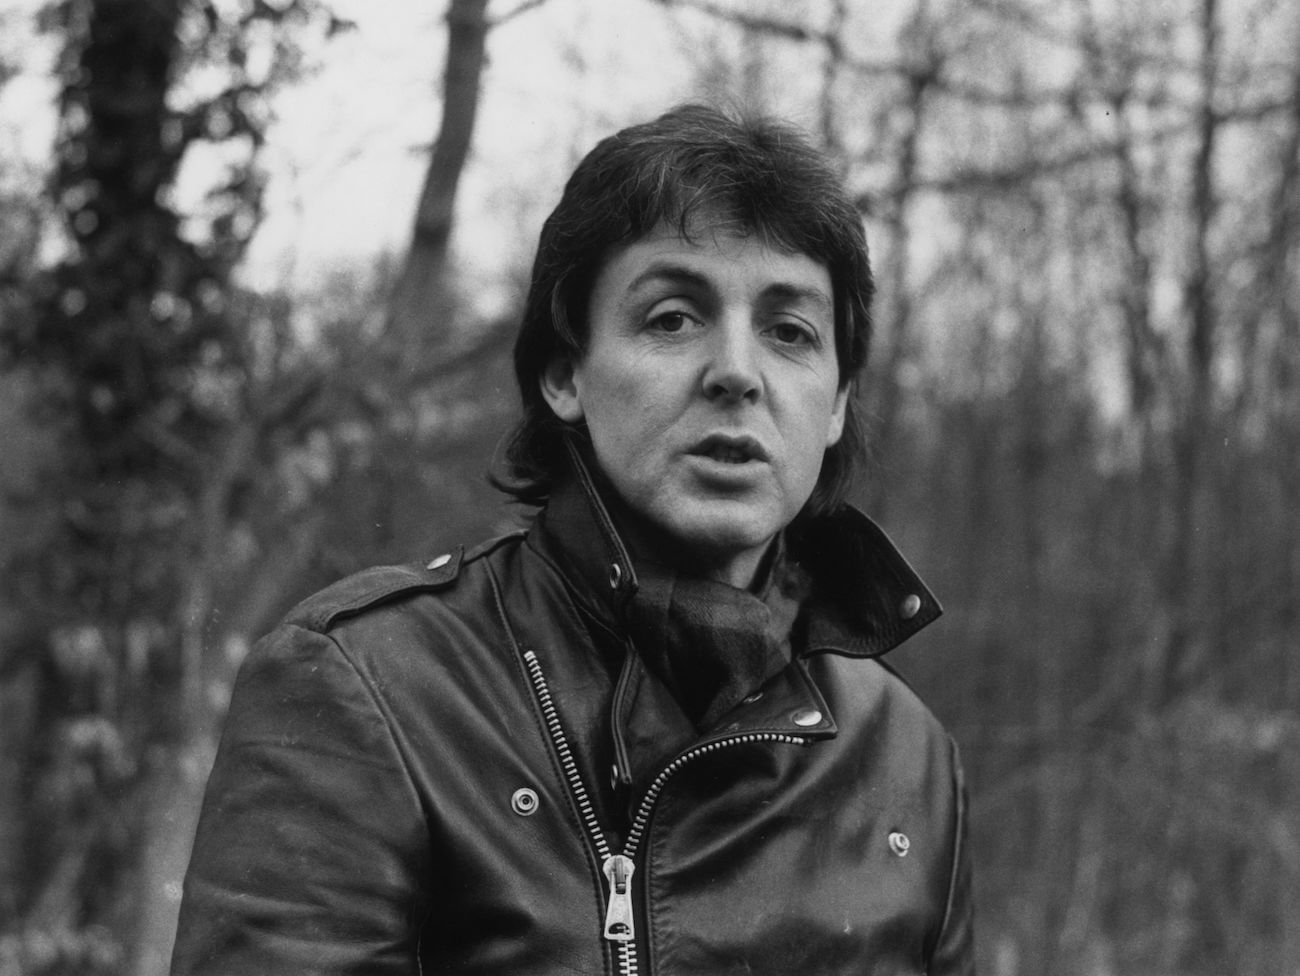 Paul McCartney on his farm in Sussex in 1980.